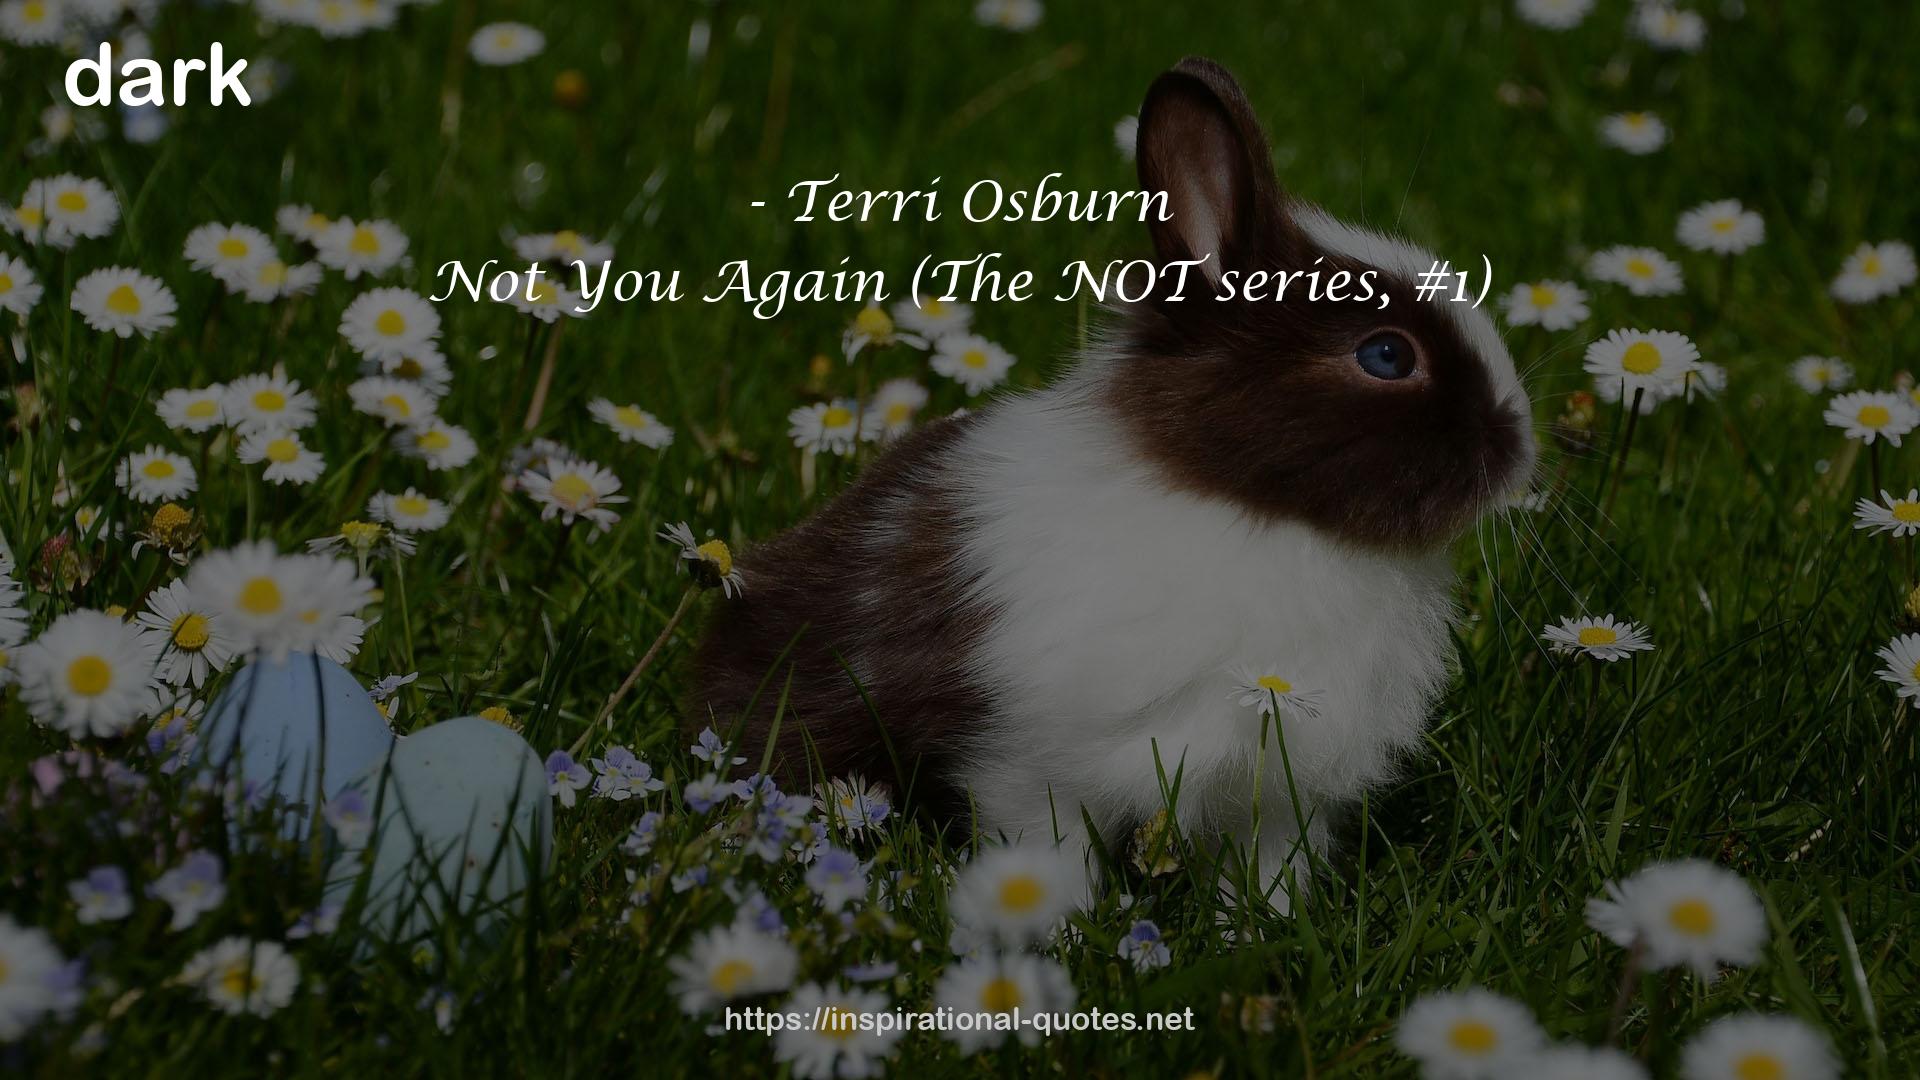 Not You Again (The NOT series, #1) QUOTES